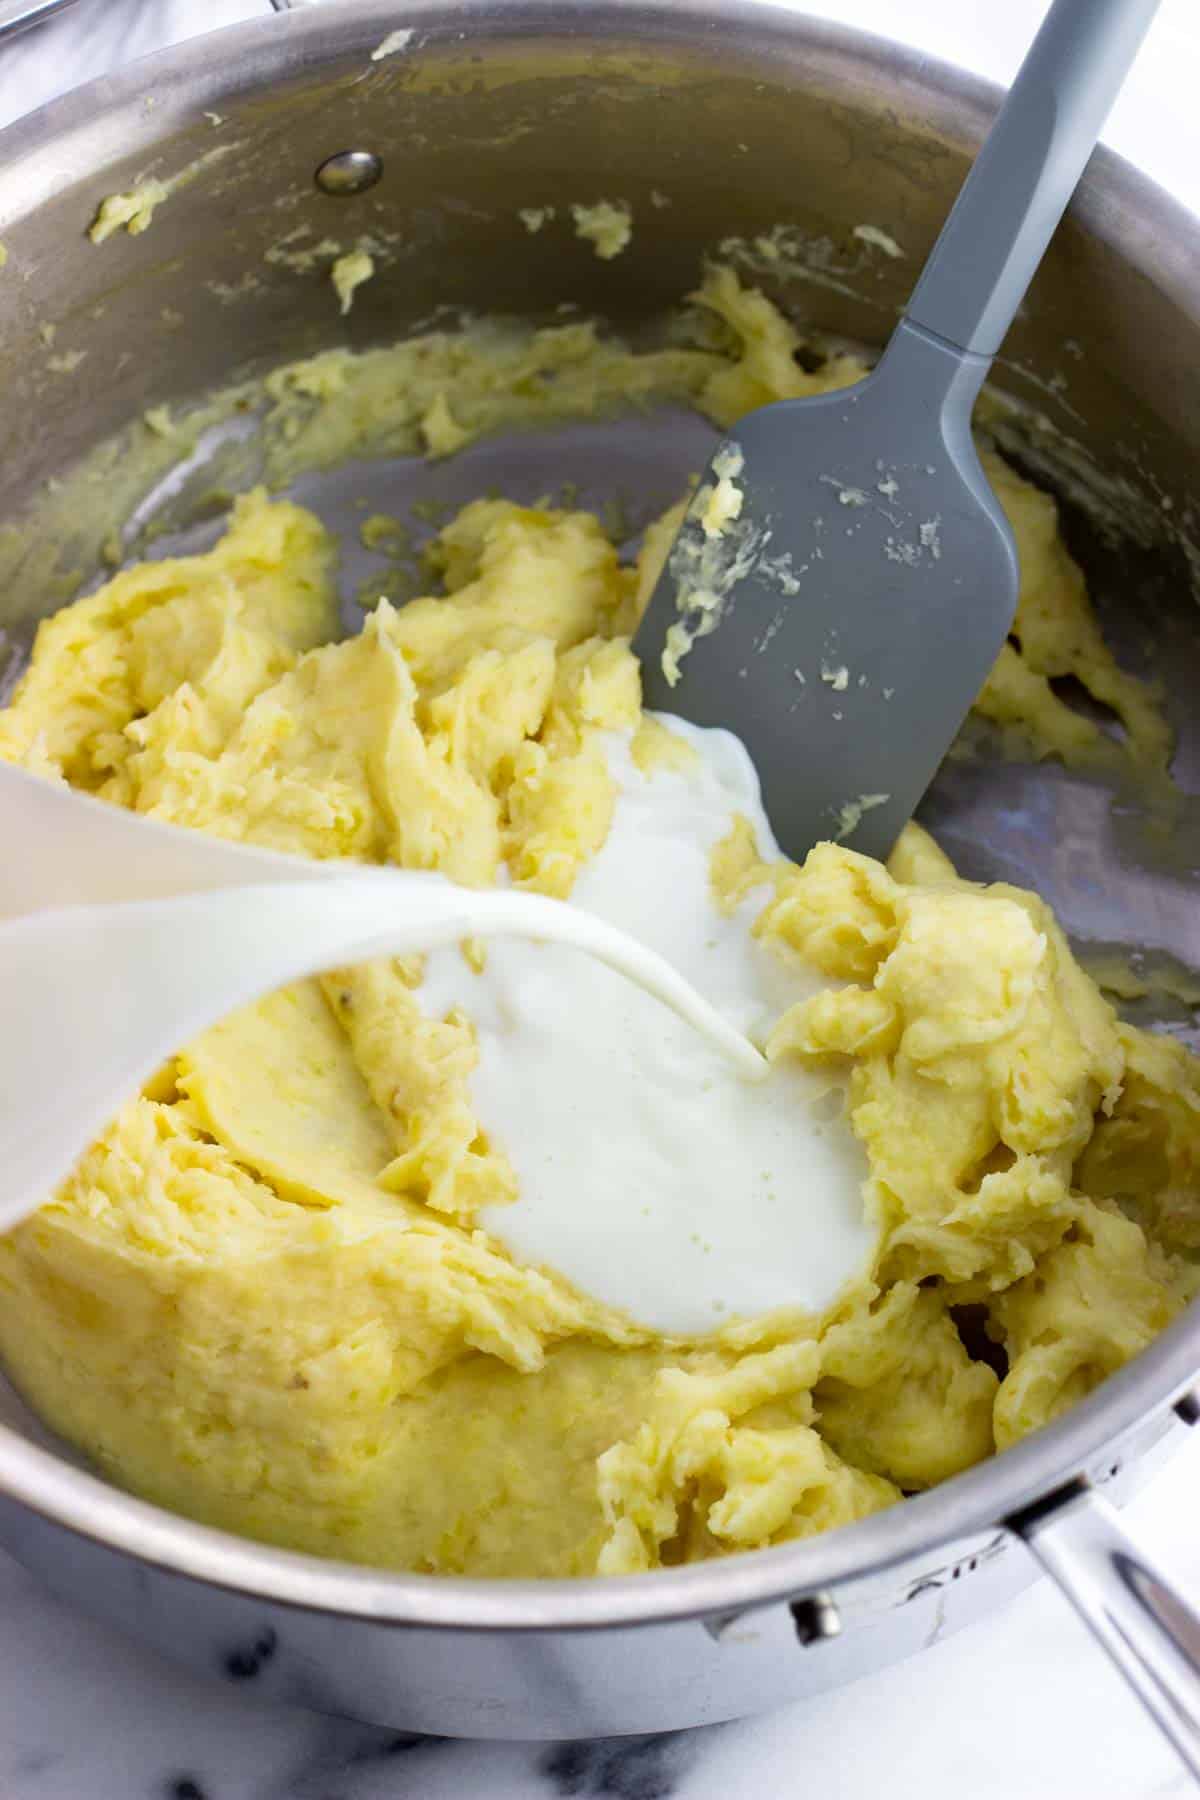 Milk being poured into the pan of roasted garlic mashed potatoes.